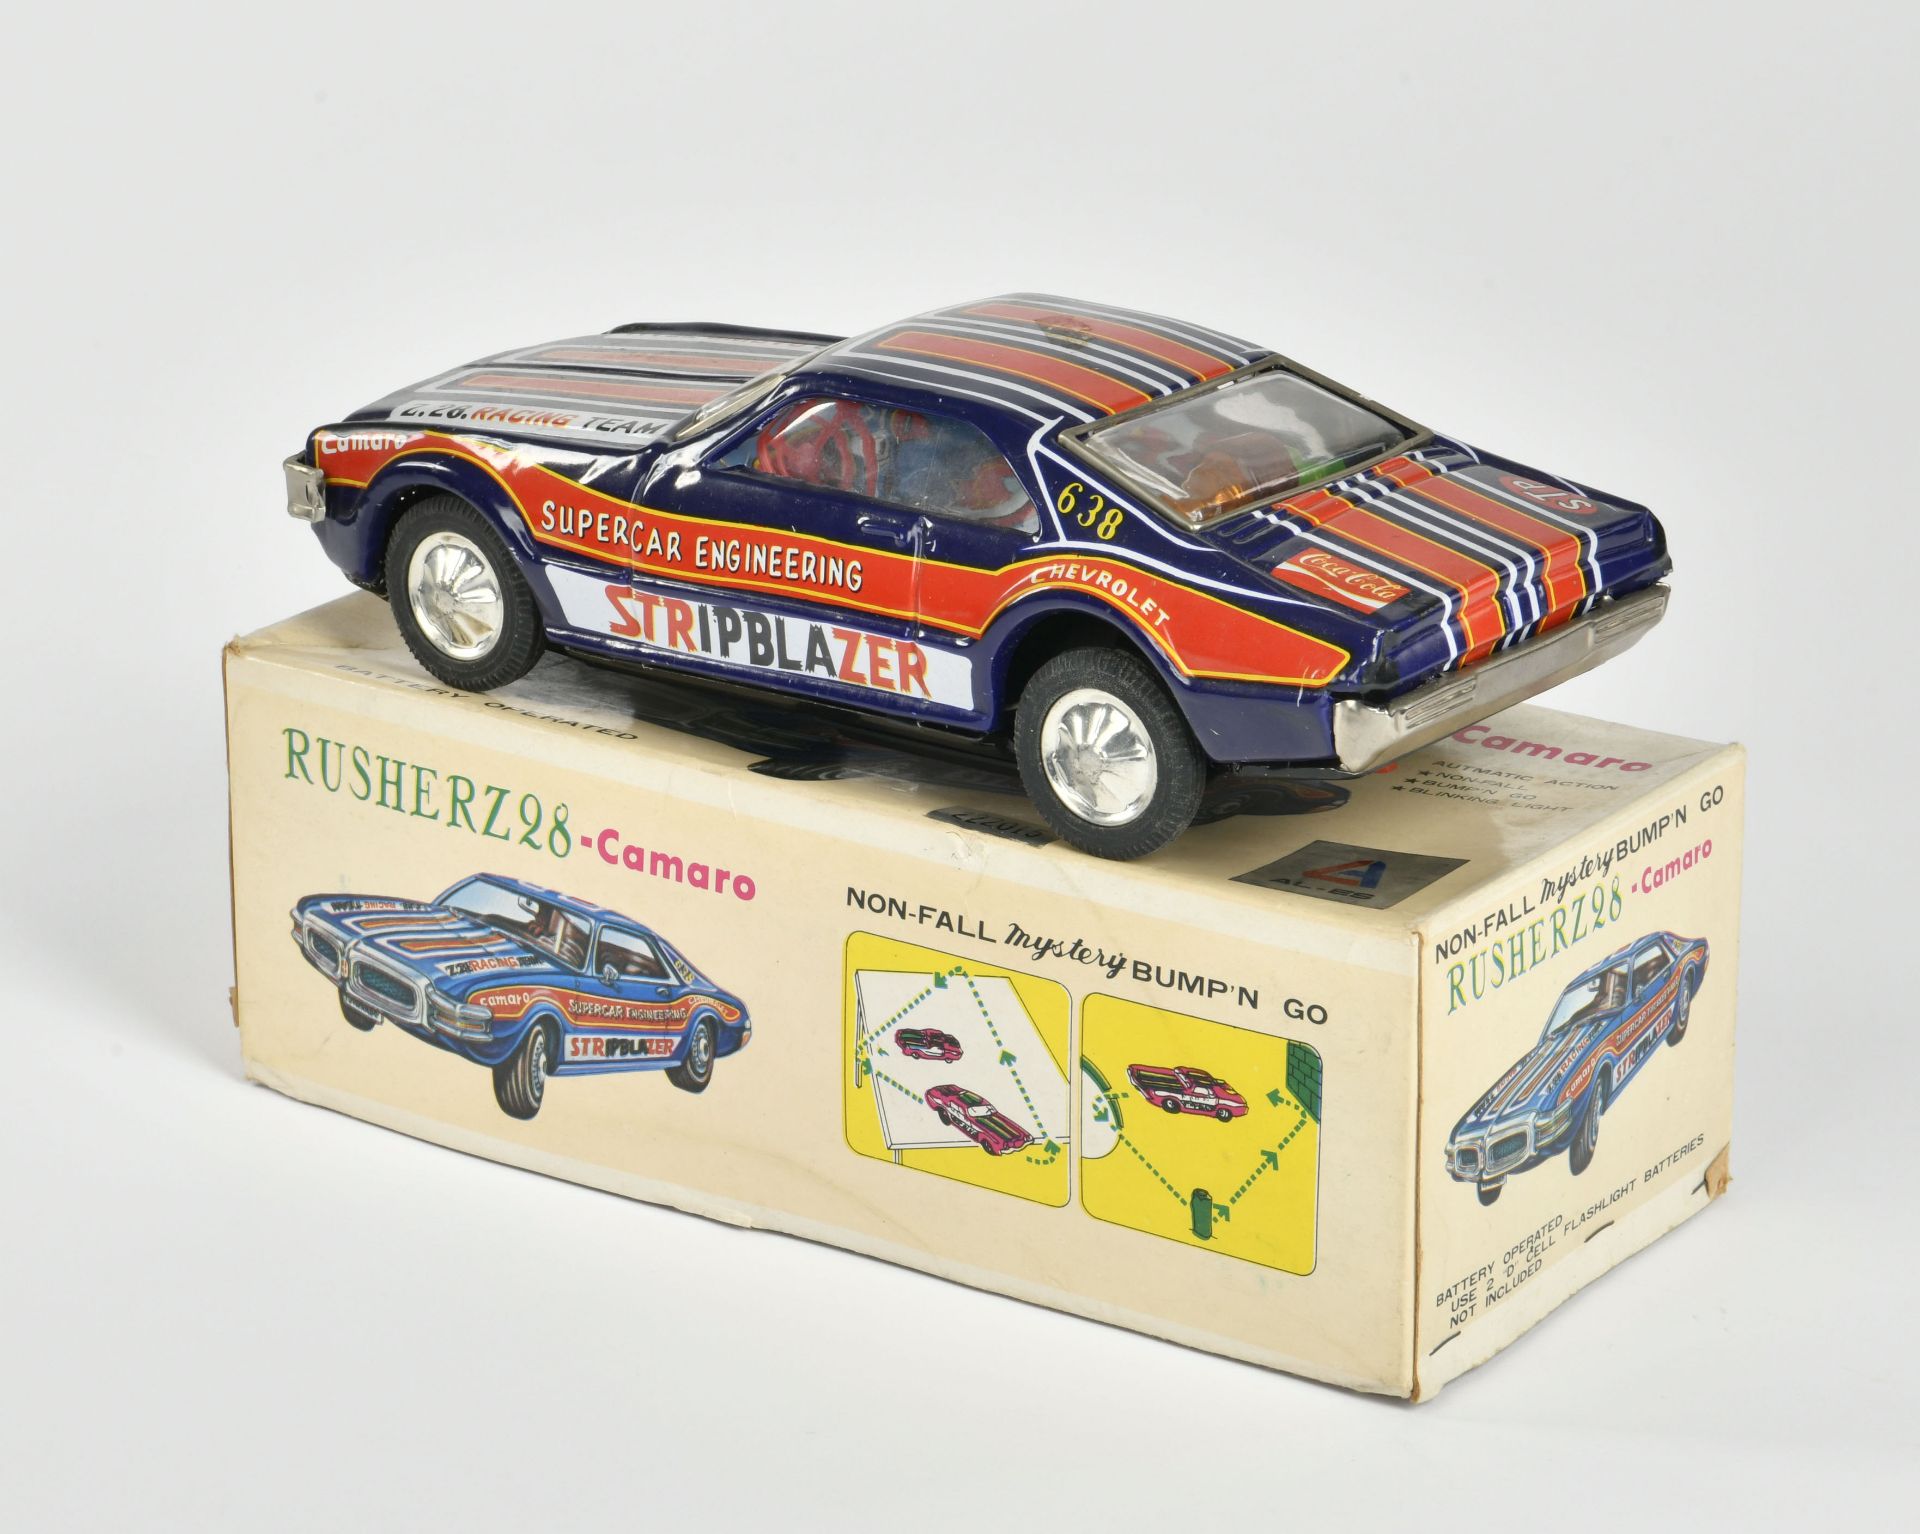 Rusher Z 28 Camaro, Japan, tin, 25cm, function not checked, paint d., box, C 3 - Image 2 of 3